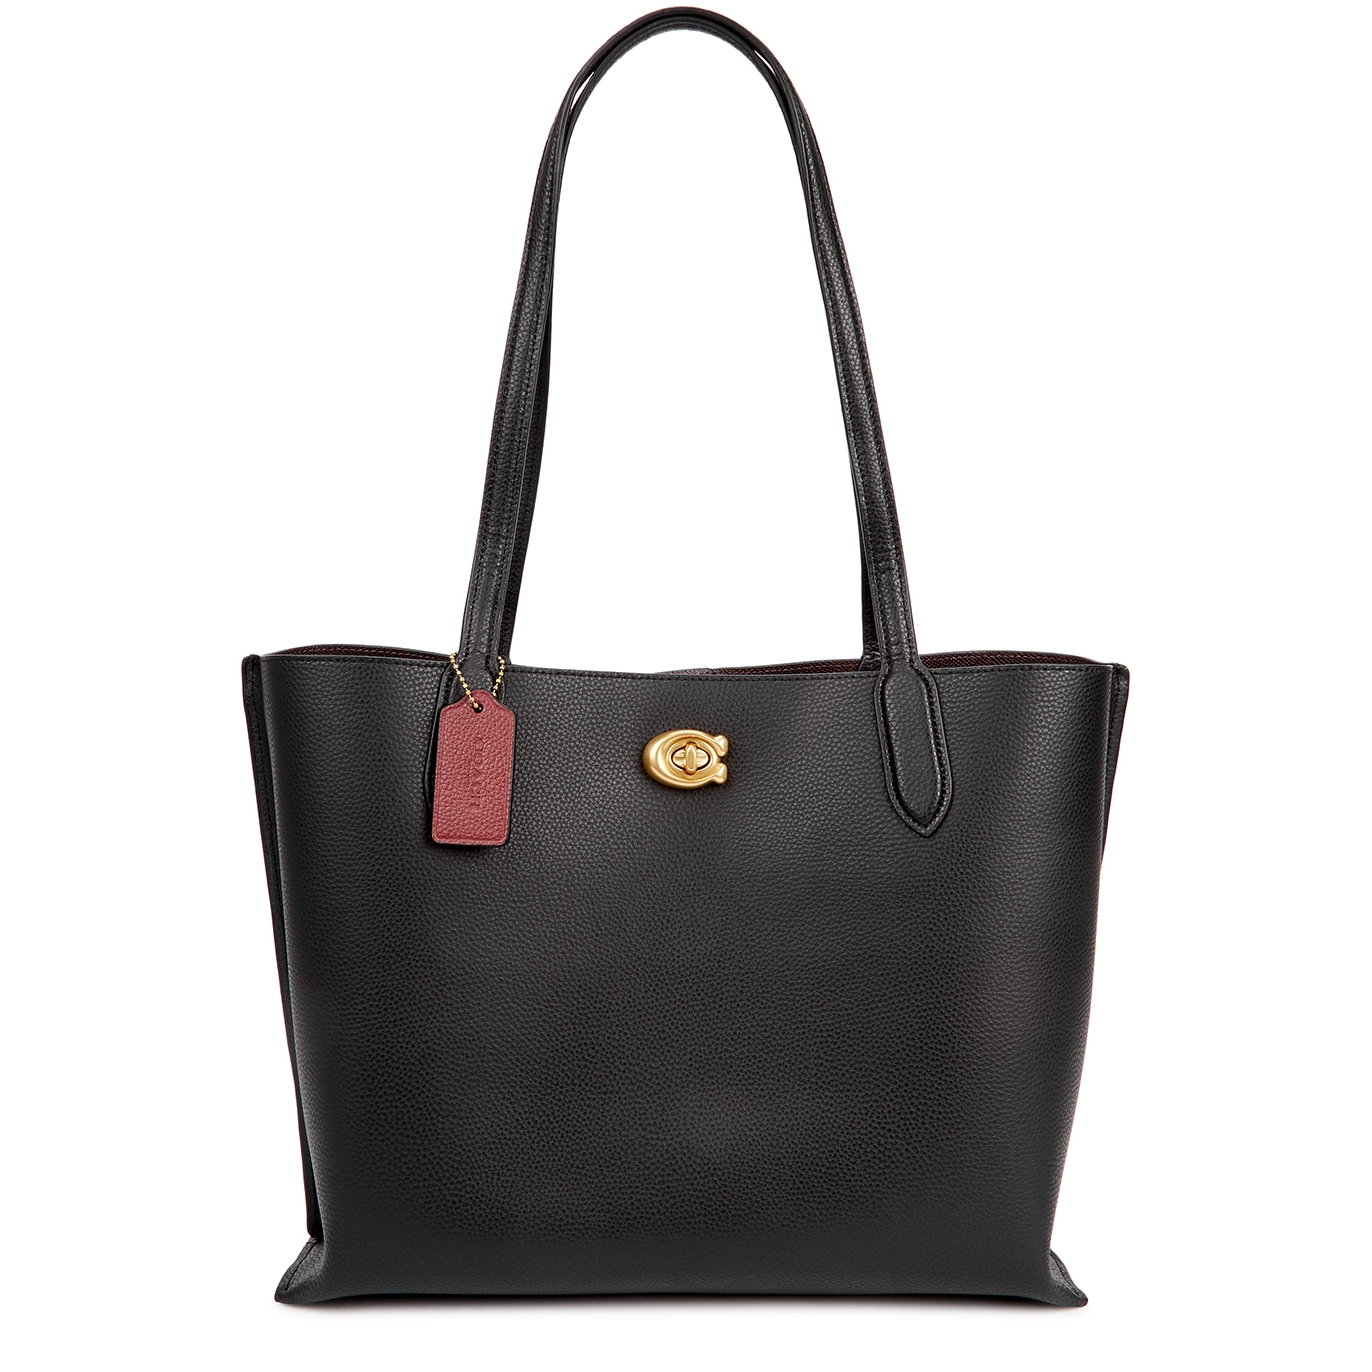 Coach Willow Grained Leather Tote - Black